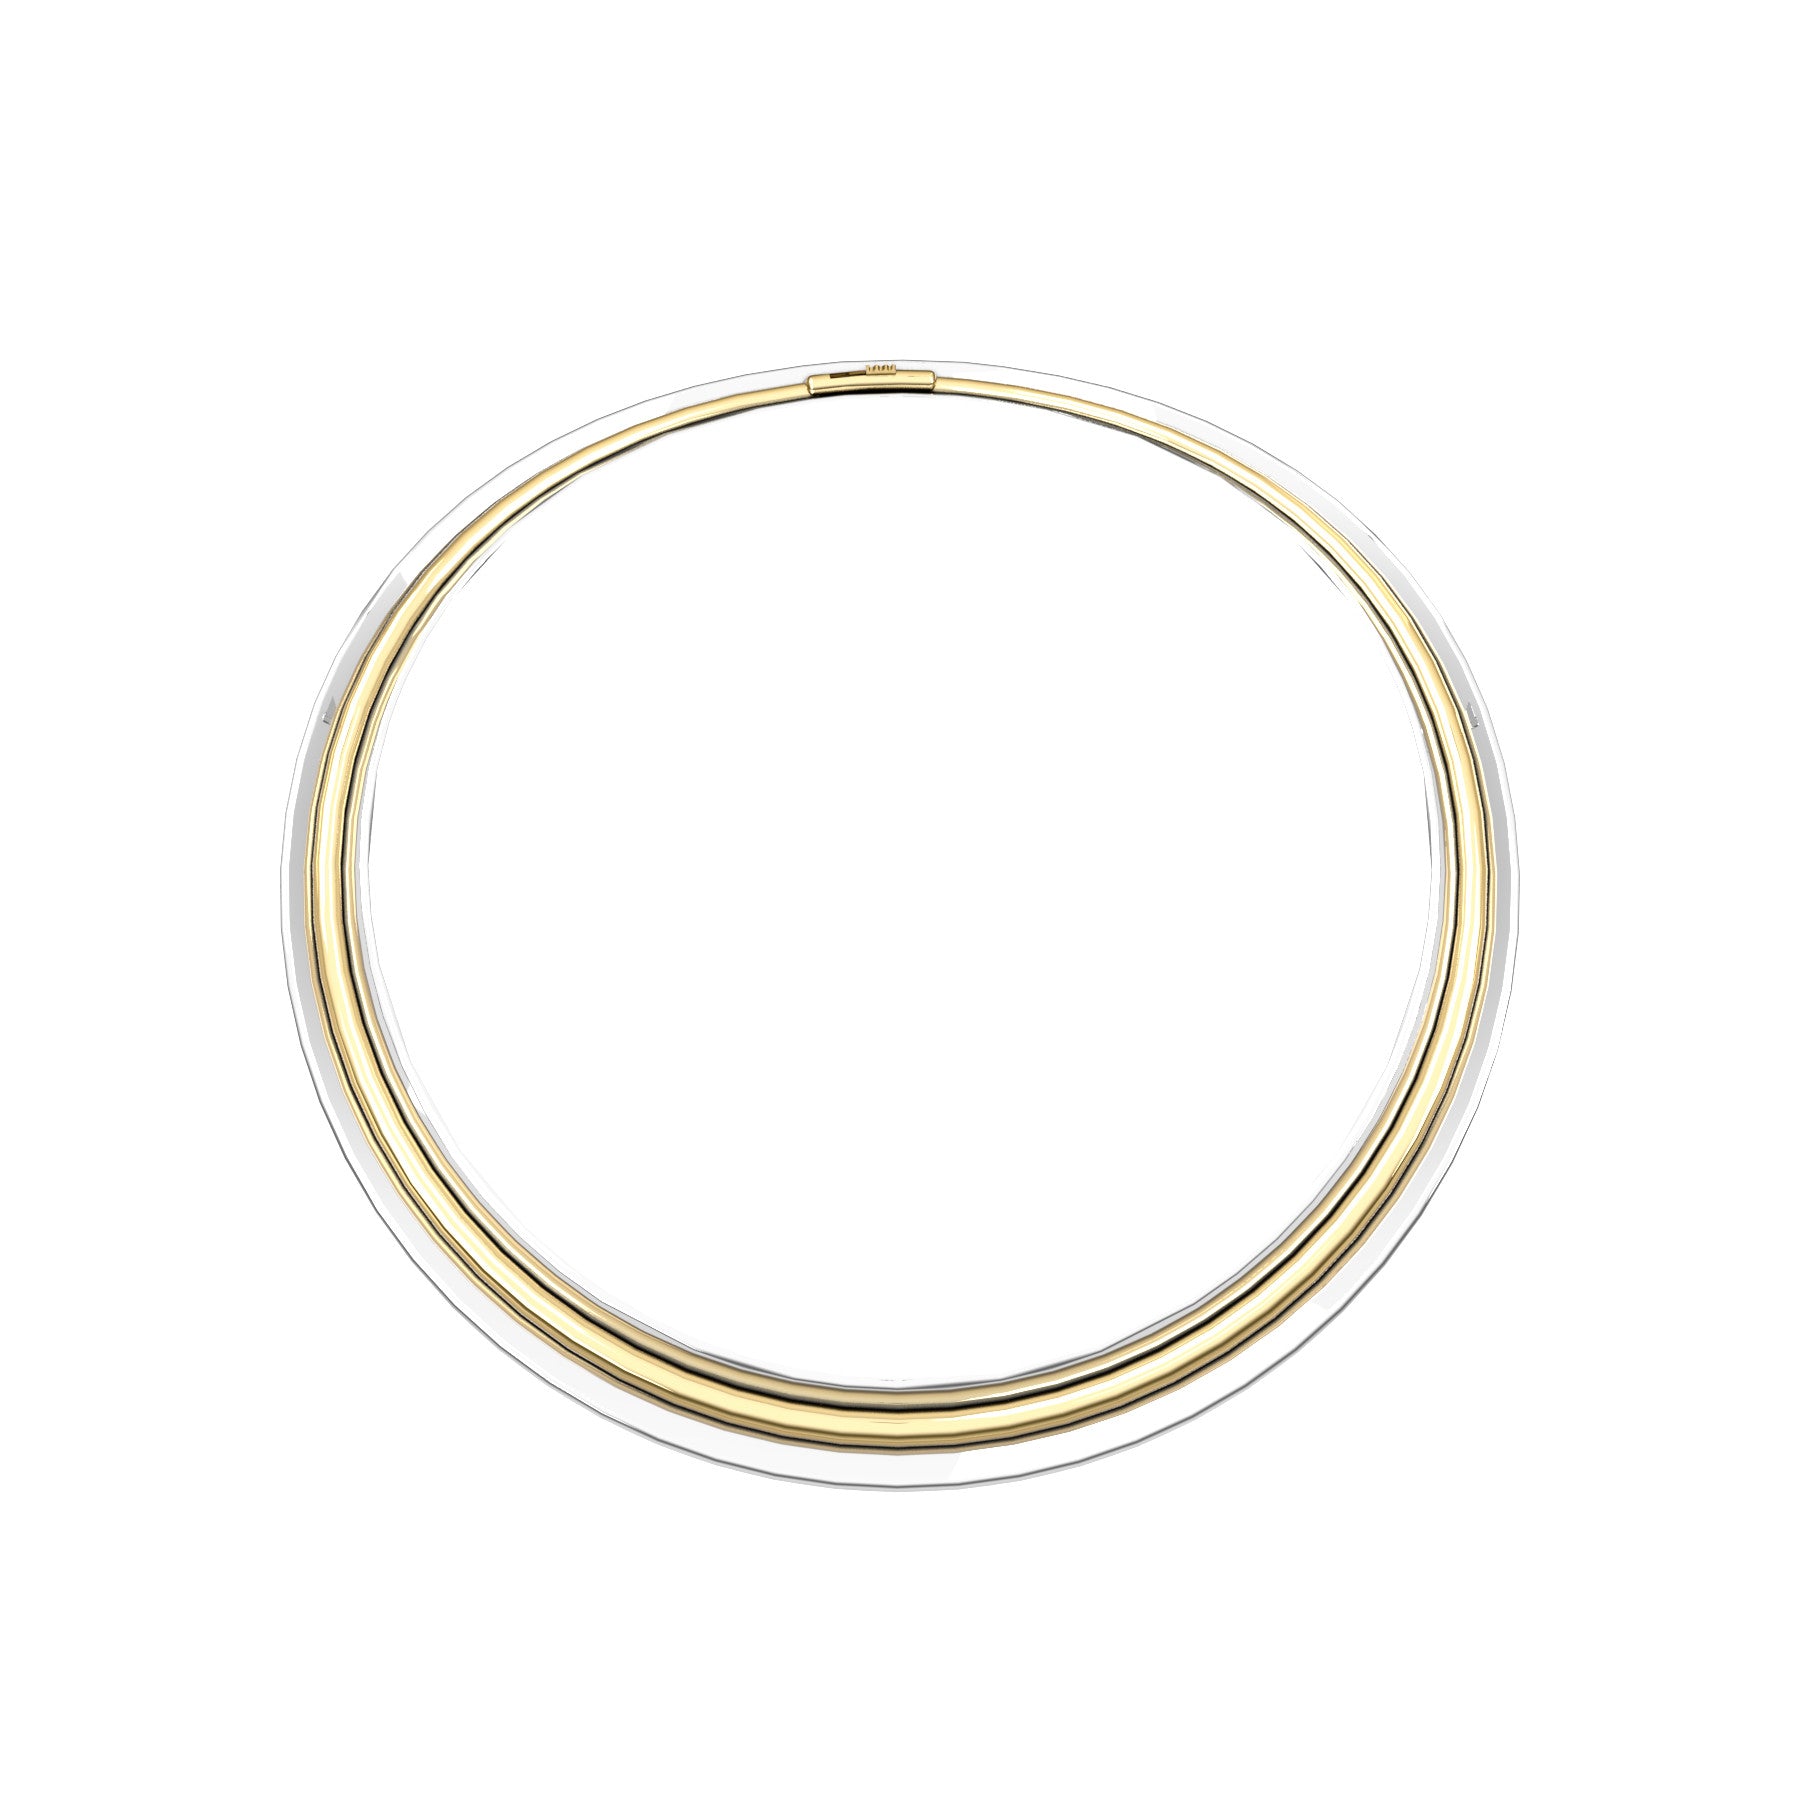 bobo rigid necklace, 18 K white and yellow gold, weight about 90 to 98,5 g. (3.17 to 3.47 oz) width 13,7 mm max